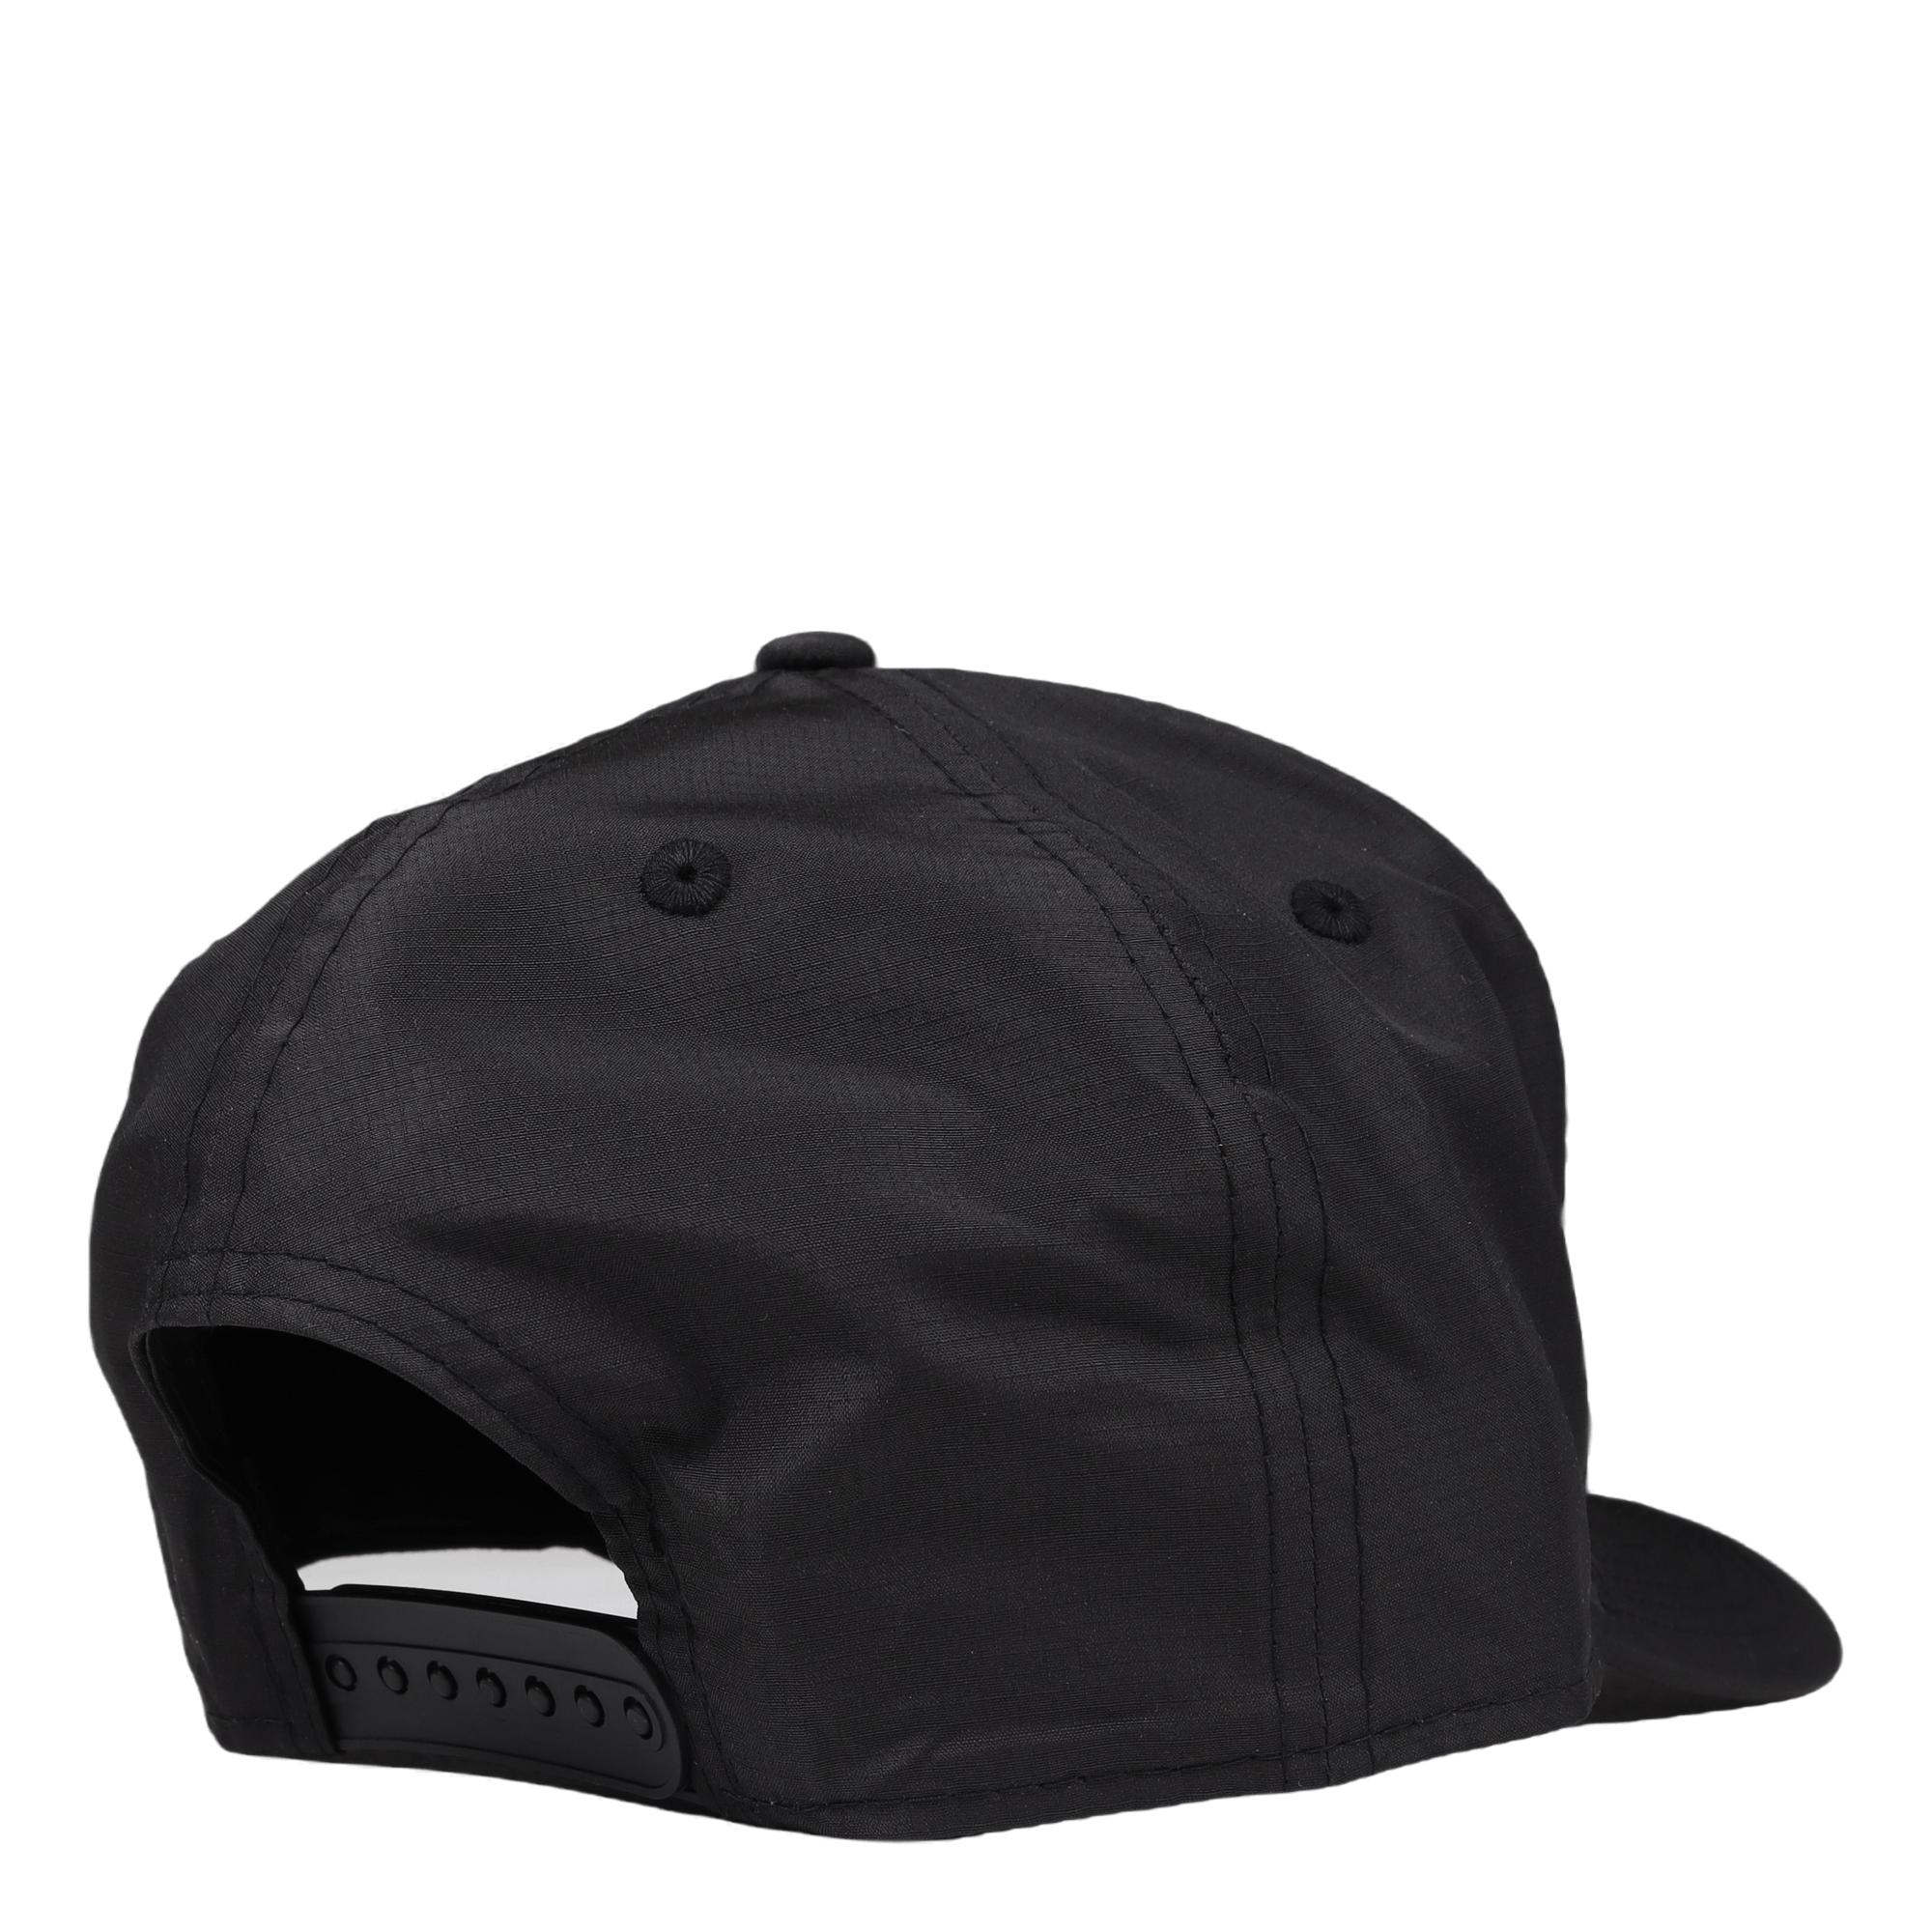 Lifestyle 9fifty Of Pc Mclare Blk